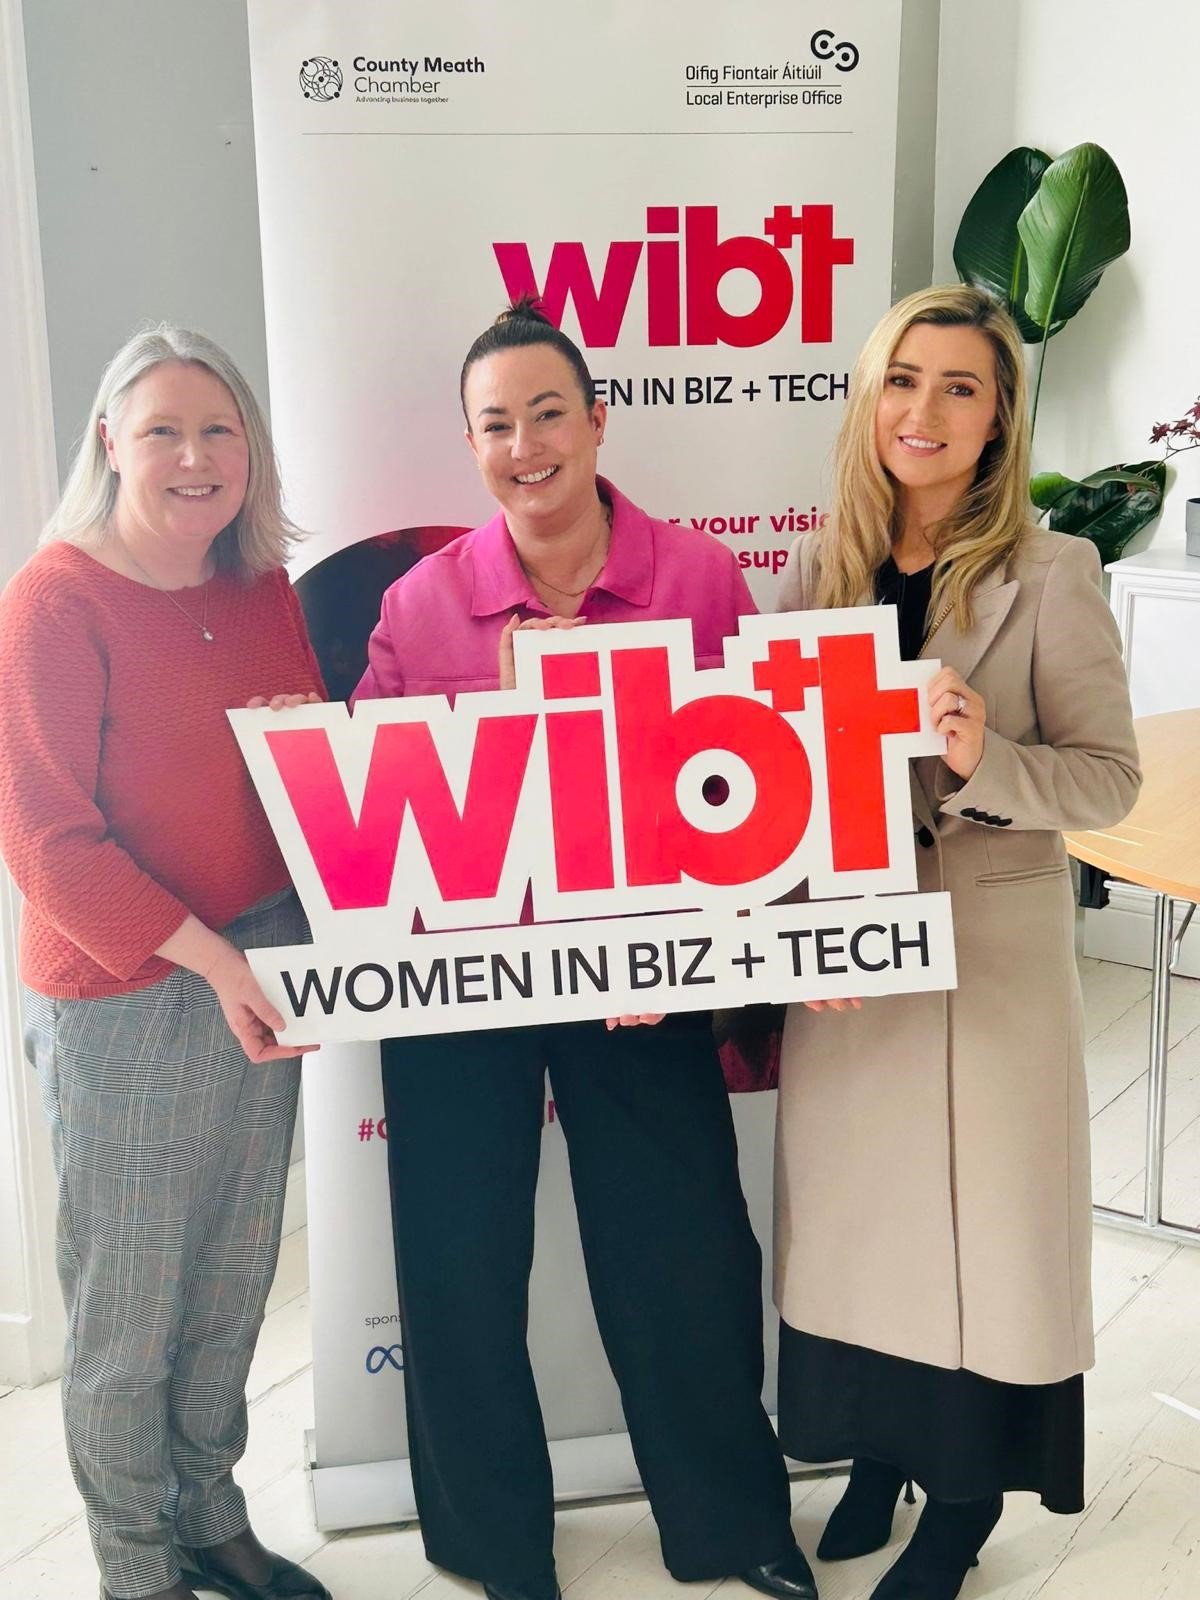 International Women’s Day celebrated in Meath at popular networking event.